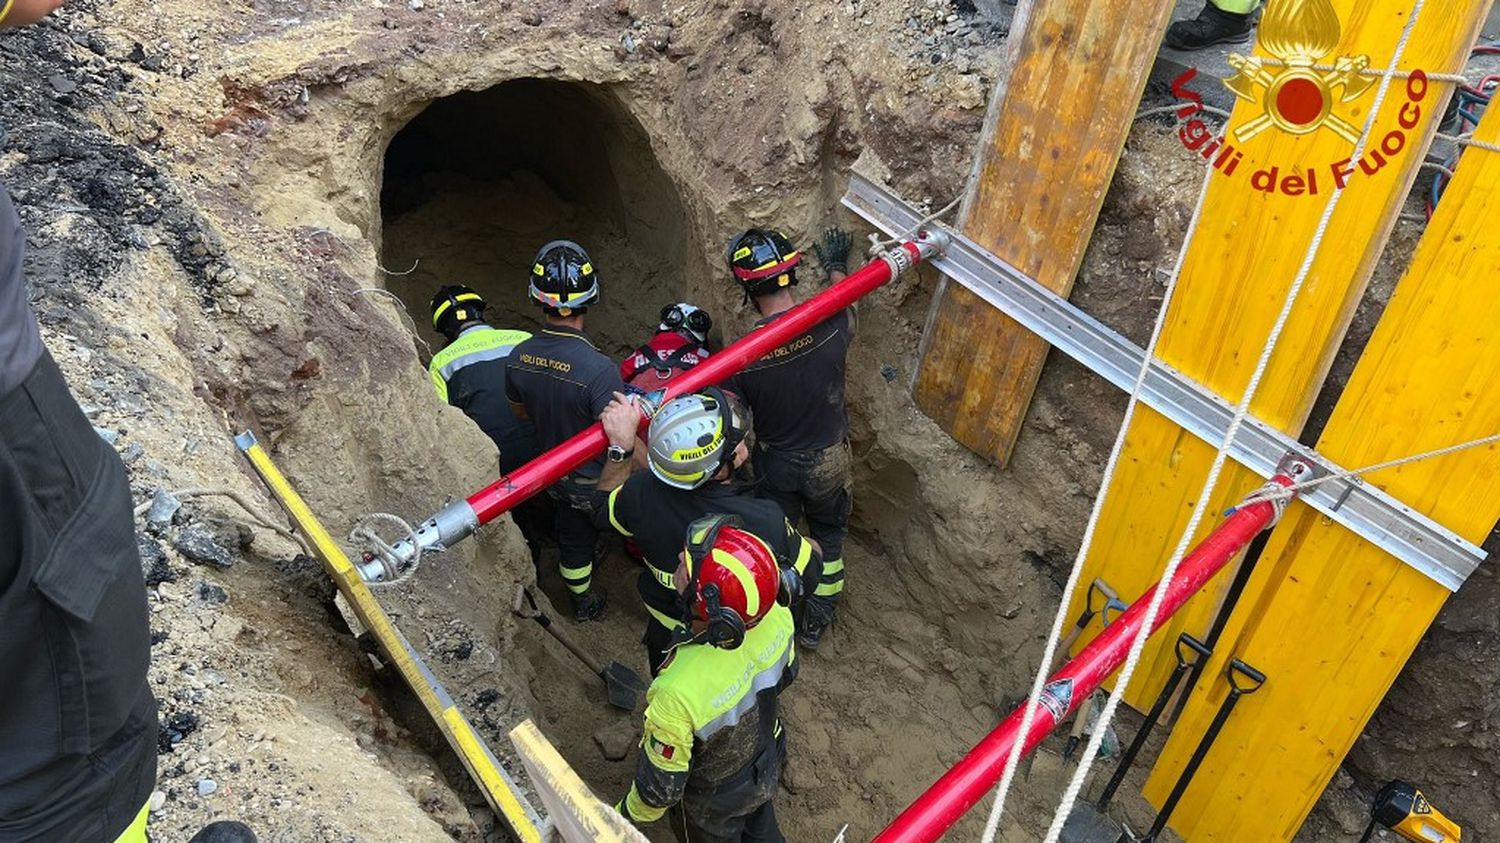 Rome: a man rescued after the collapse of the tunnel he was digging, the trail of the attempted burglary studied
